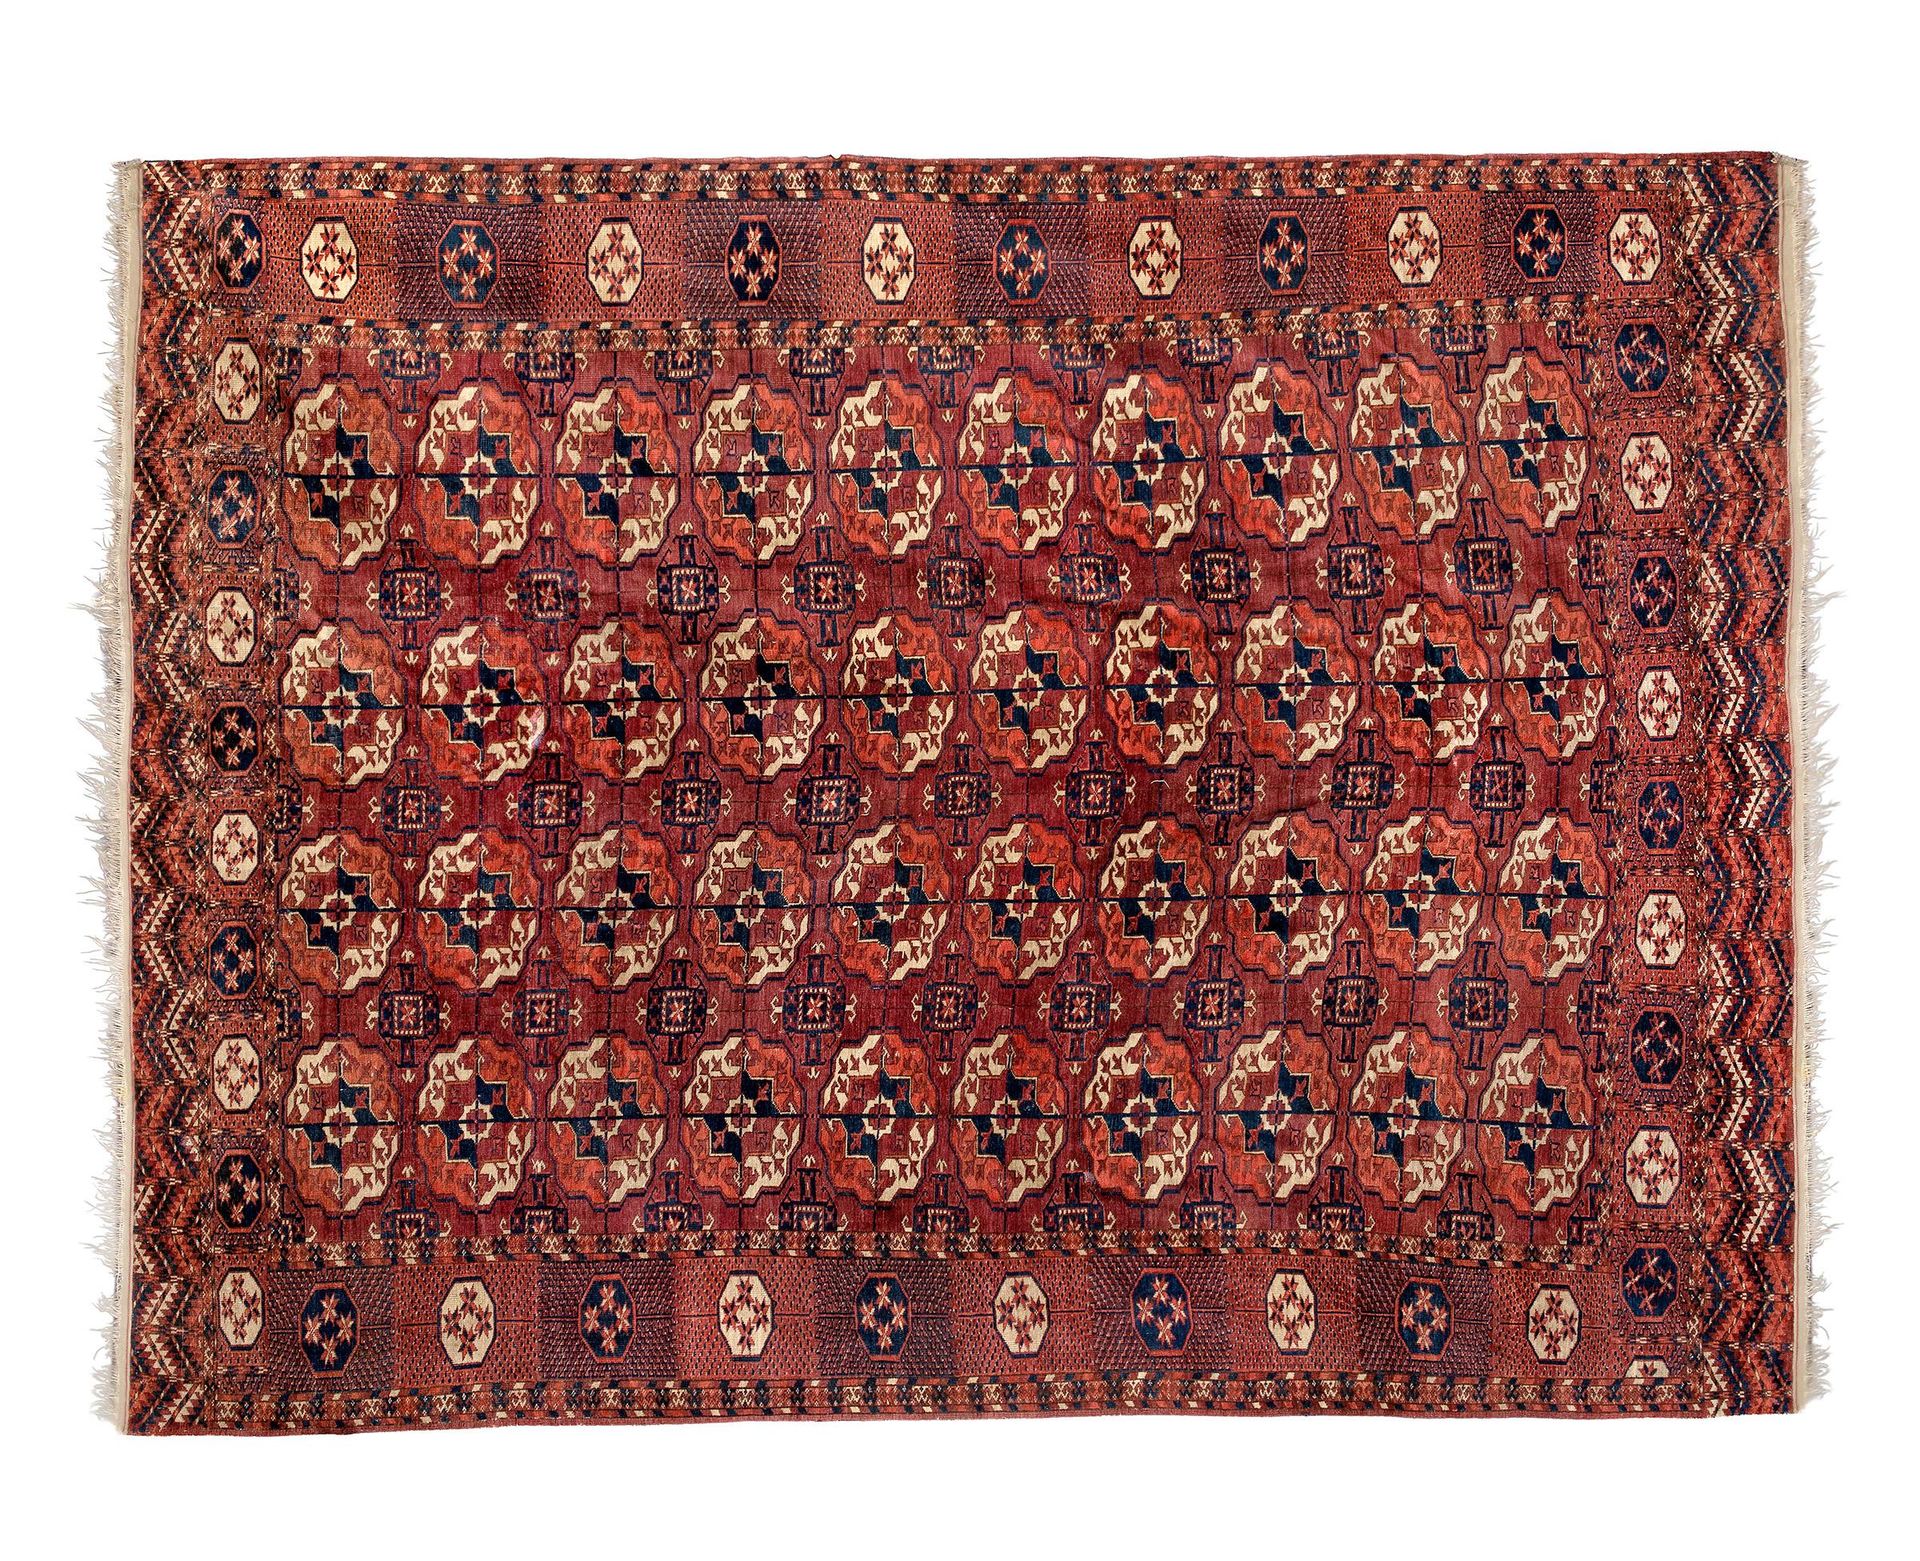 Null An antique Turkish carpet, 19th century.
Knotted in wool. 500,000 knots/m2.&hellip;